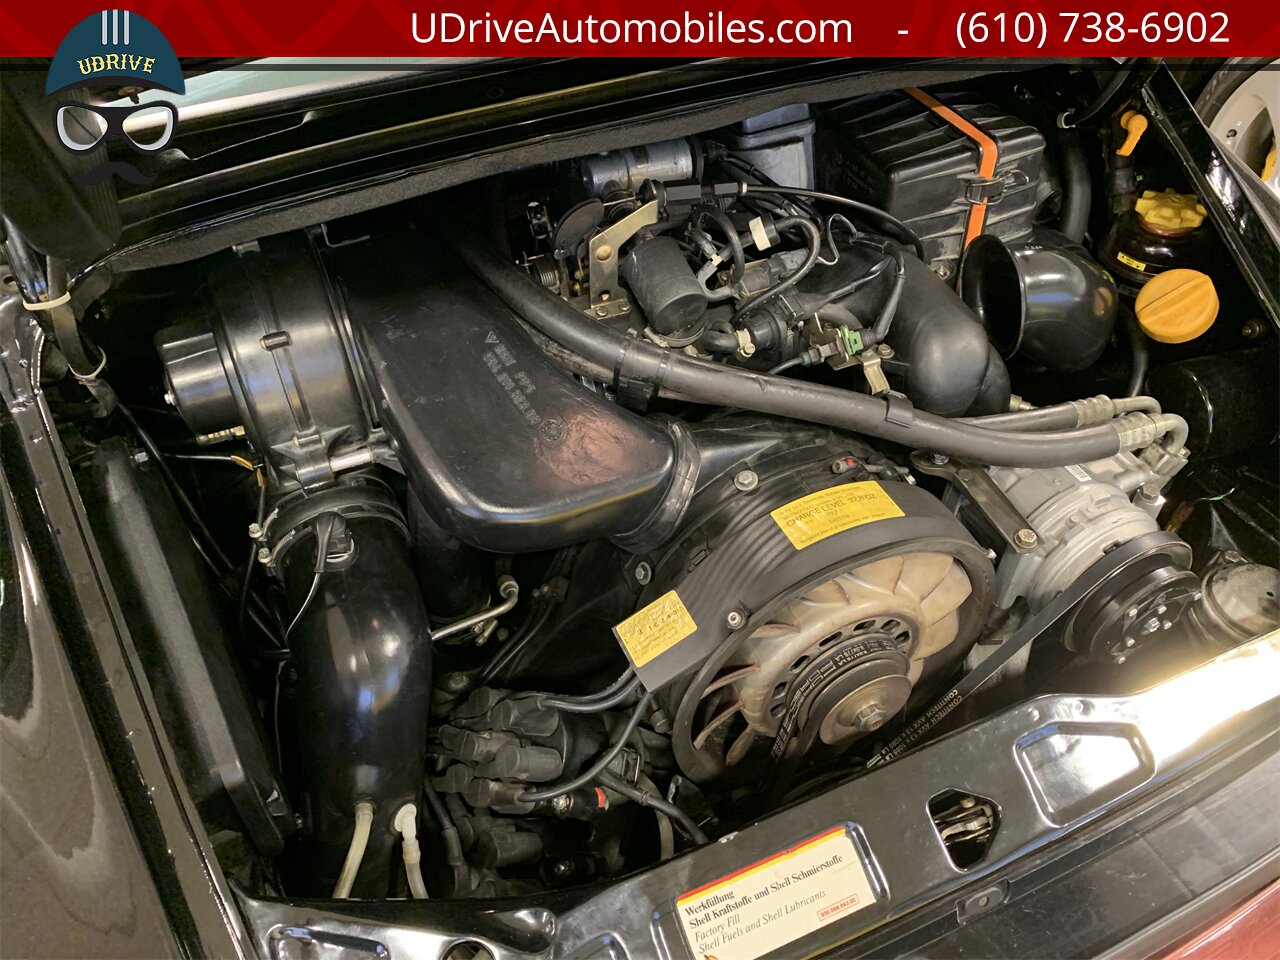 1991 Porsche 911 Carrera 2 964 Limited Slip Differential LSD  Service History Over $16k Spent Since 2018 - Photo 54 - West Chester, PA 19382